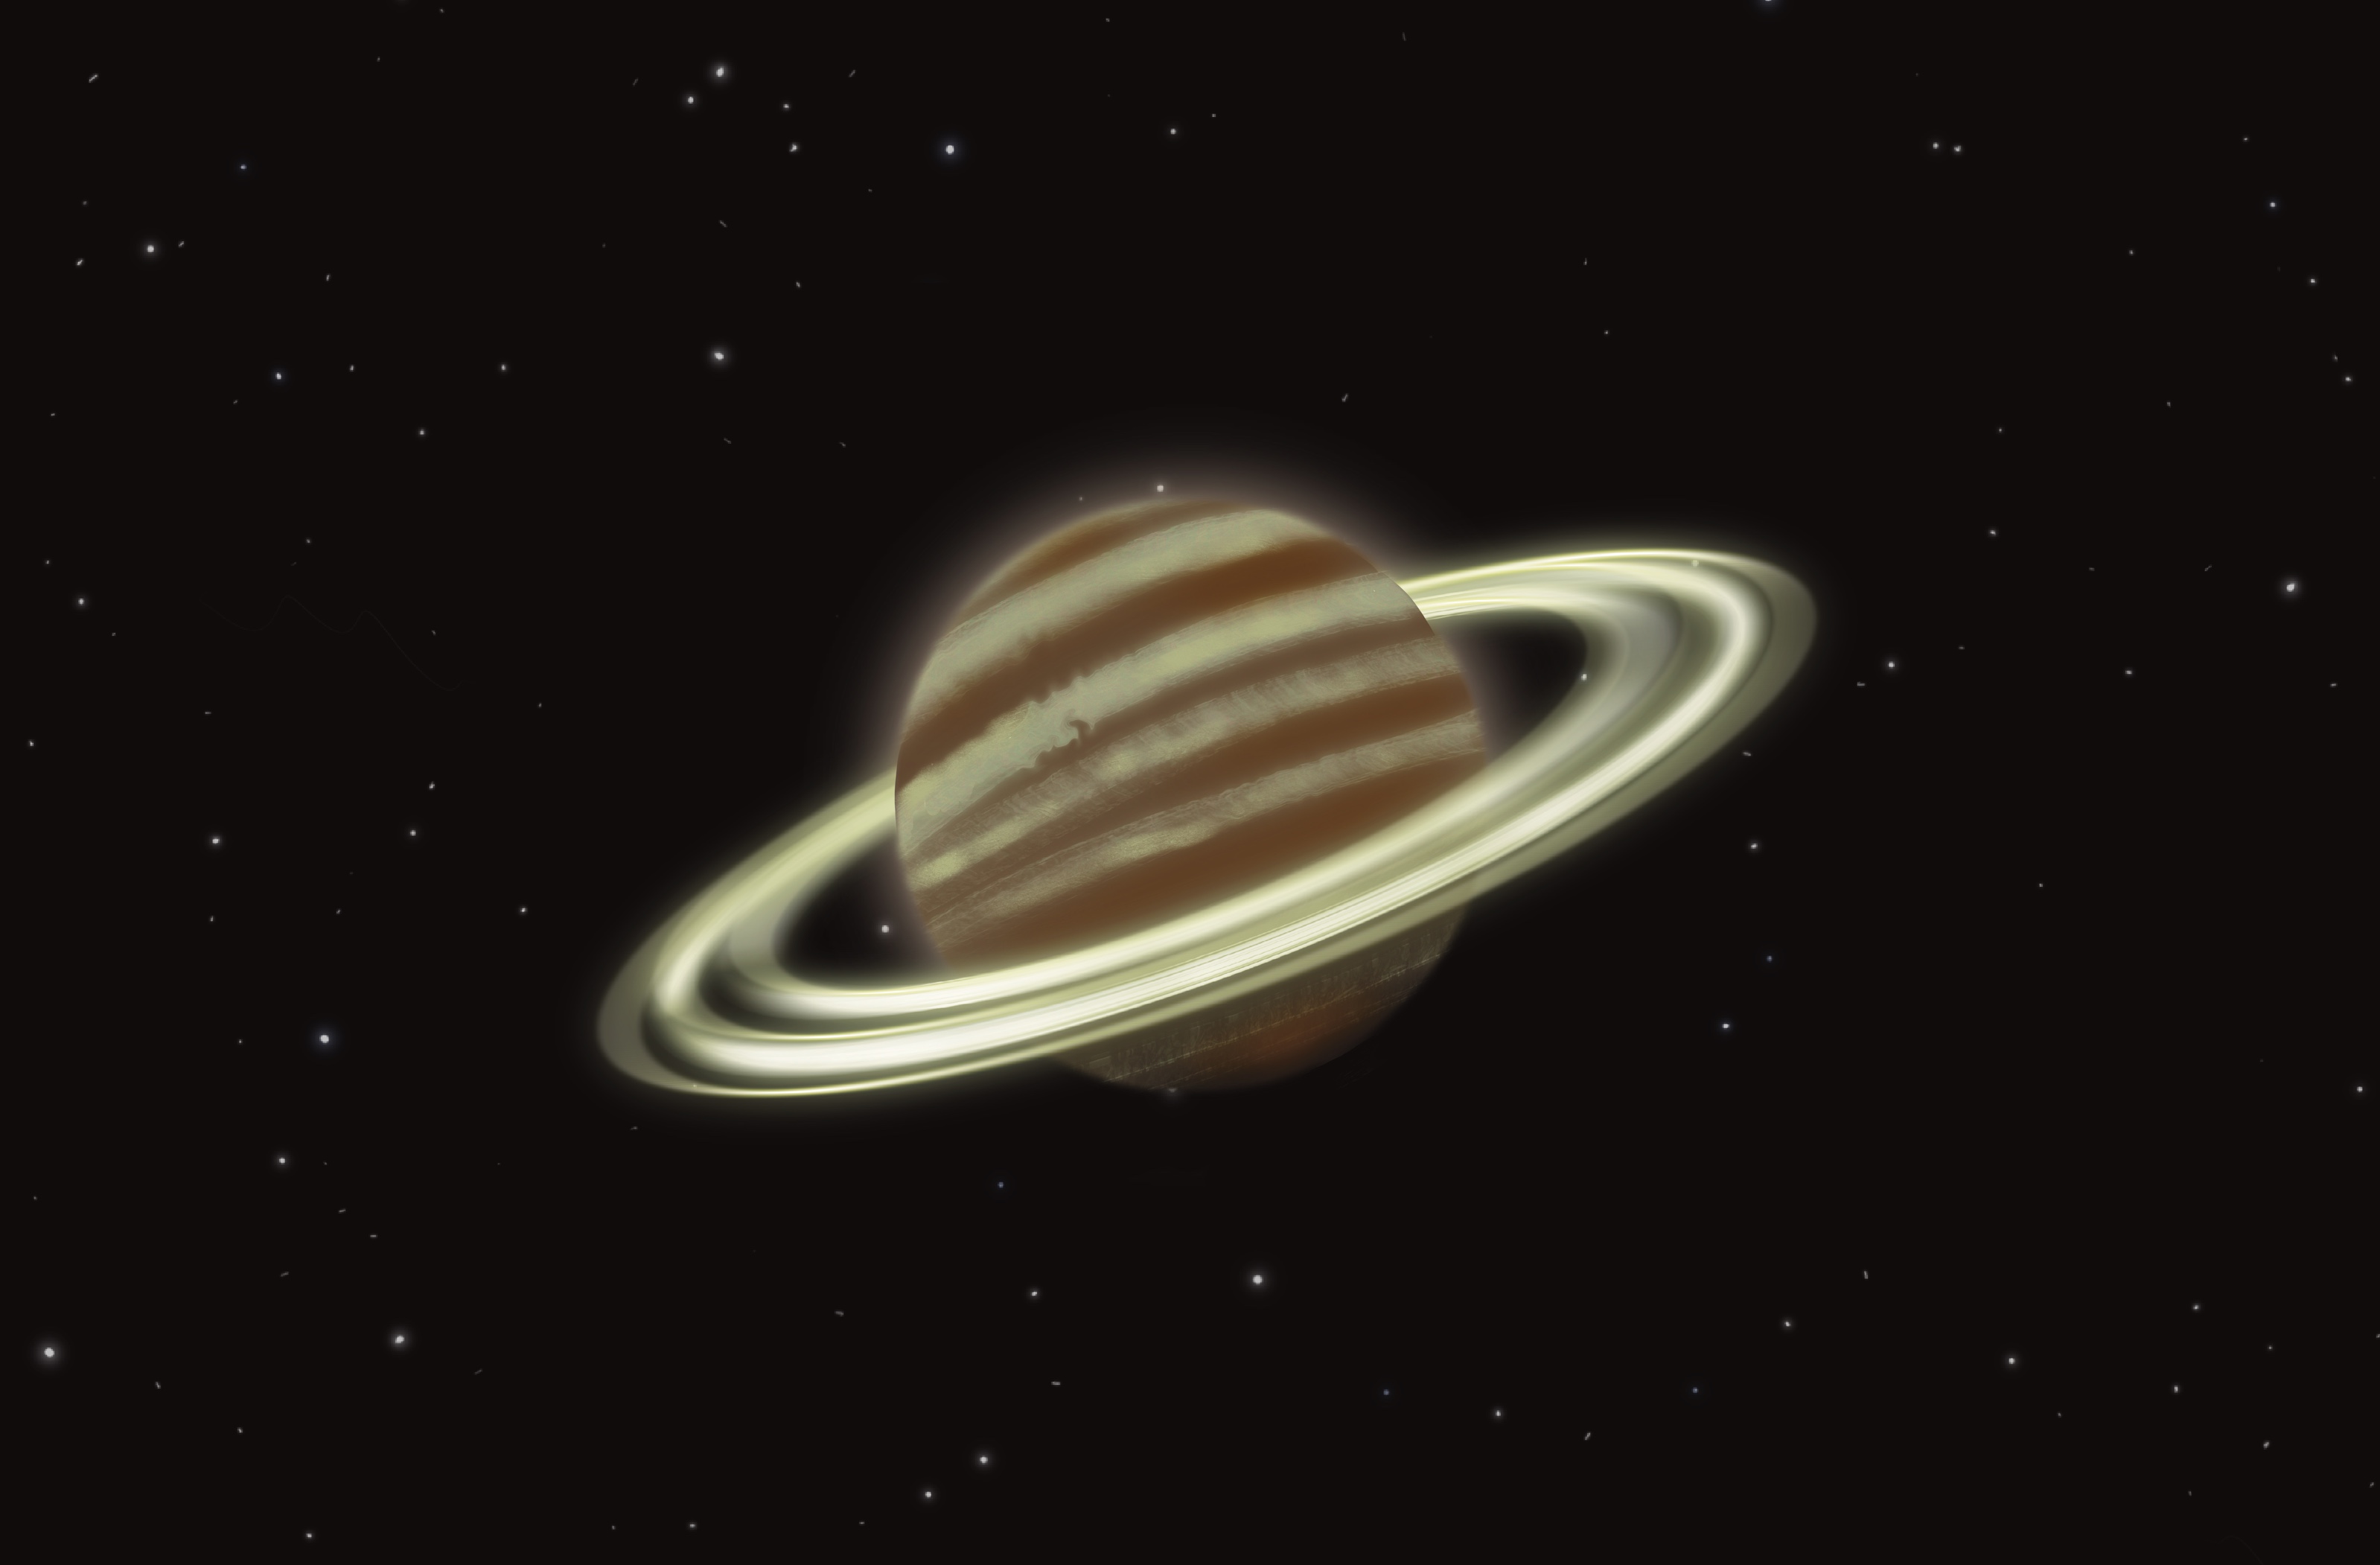 Clickable thumbnail of a planet with rings.